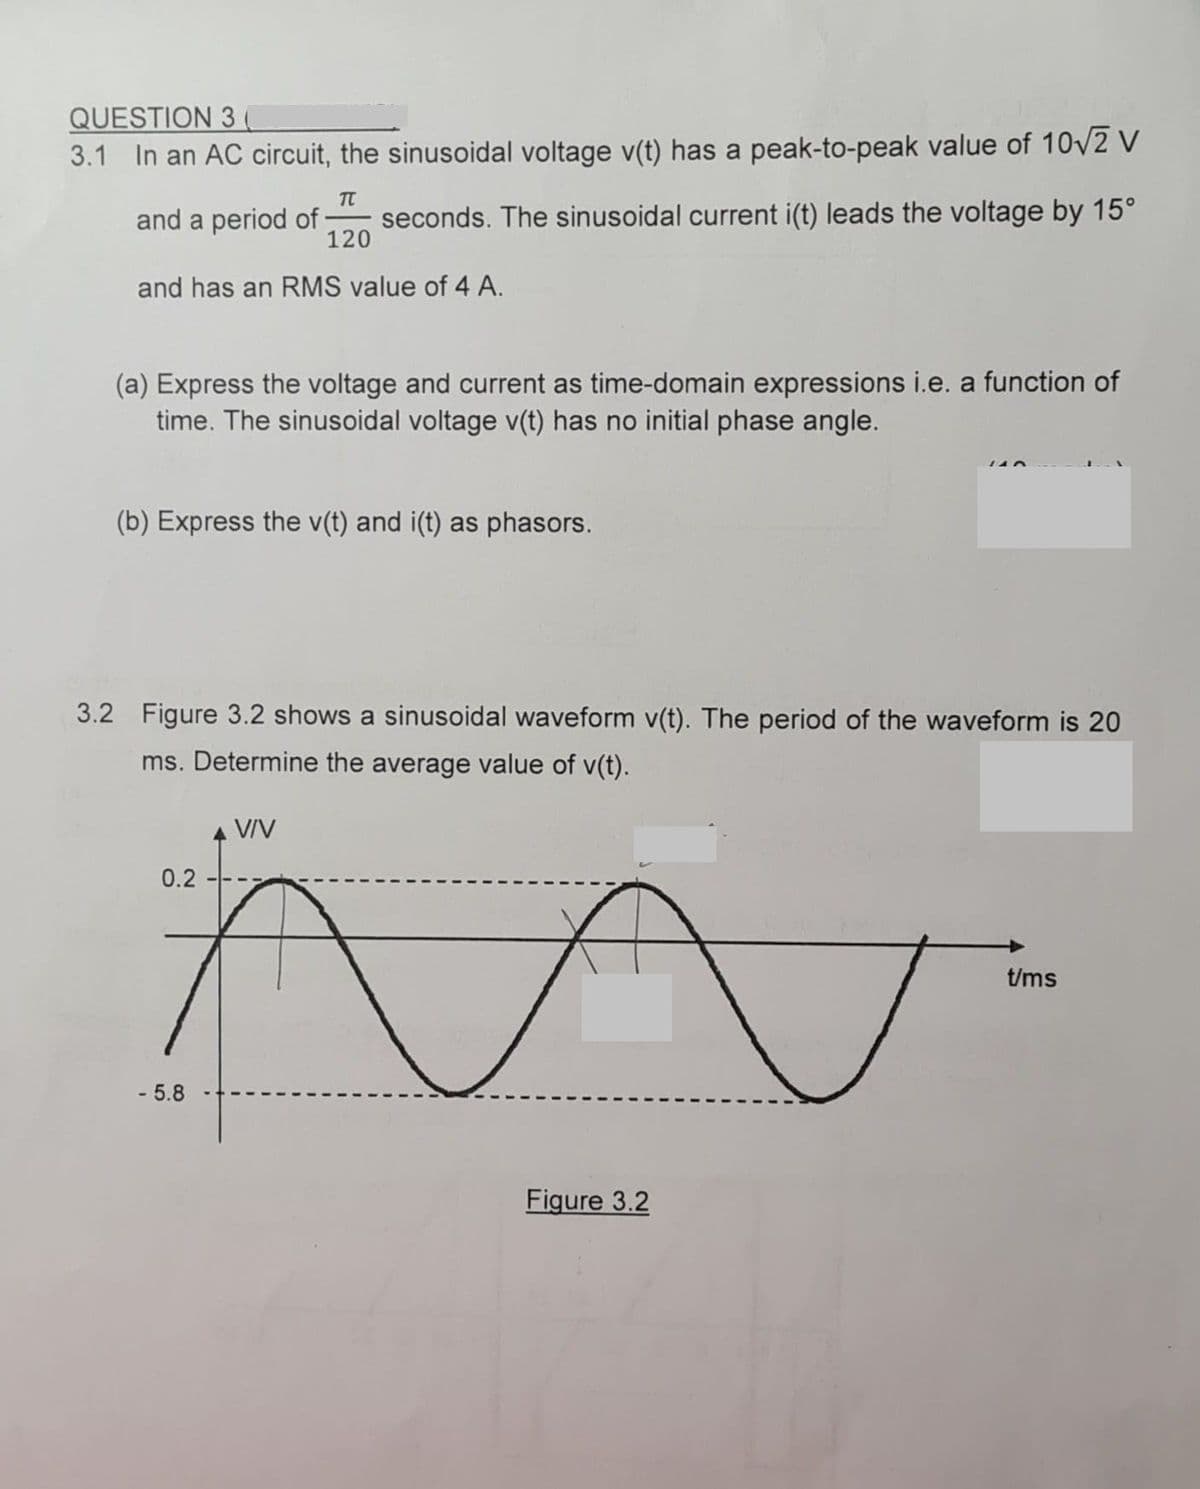 QUESTION 3 (
3.1 In an AC circuit, the sinusoidal voltage v(t) has a peak-to-peak value of 10/2 V
TT
and a period of
seconds. The sinusoidal current i(t) leads the voltage by 15°
120
and has an RMS value of 4 A.
(a) Express the voltage and current as time-domain expressions i.e. a function of
time. The sinusoidal voltage v(t) has no initial phase angle.
(b) Express the v(t) and i(t) as phasors.
3.2 Figure 3.2 shows a sinusoidal waveform v(t). The period of the waveform is 20
ms. Determine the average value of v(t).
VIV
0.2
t/ms
- 5.8
Figure 3.2
